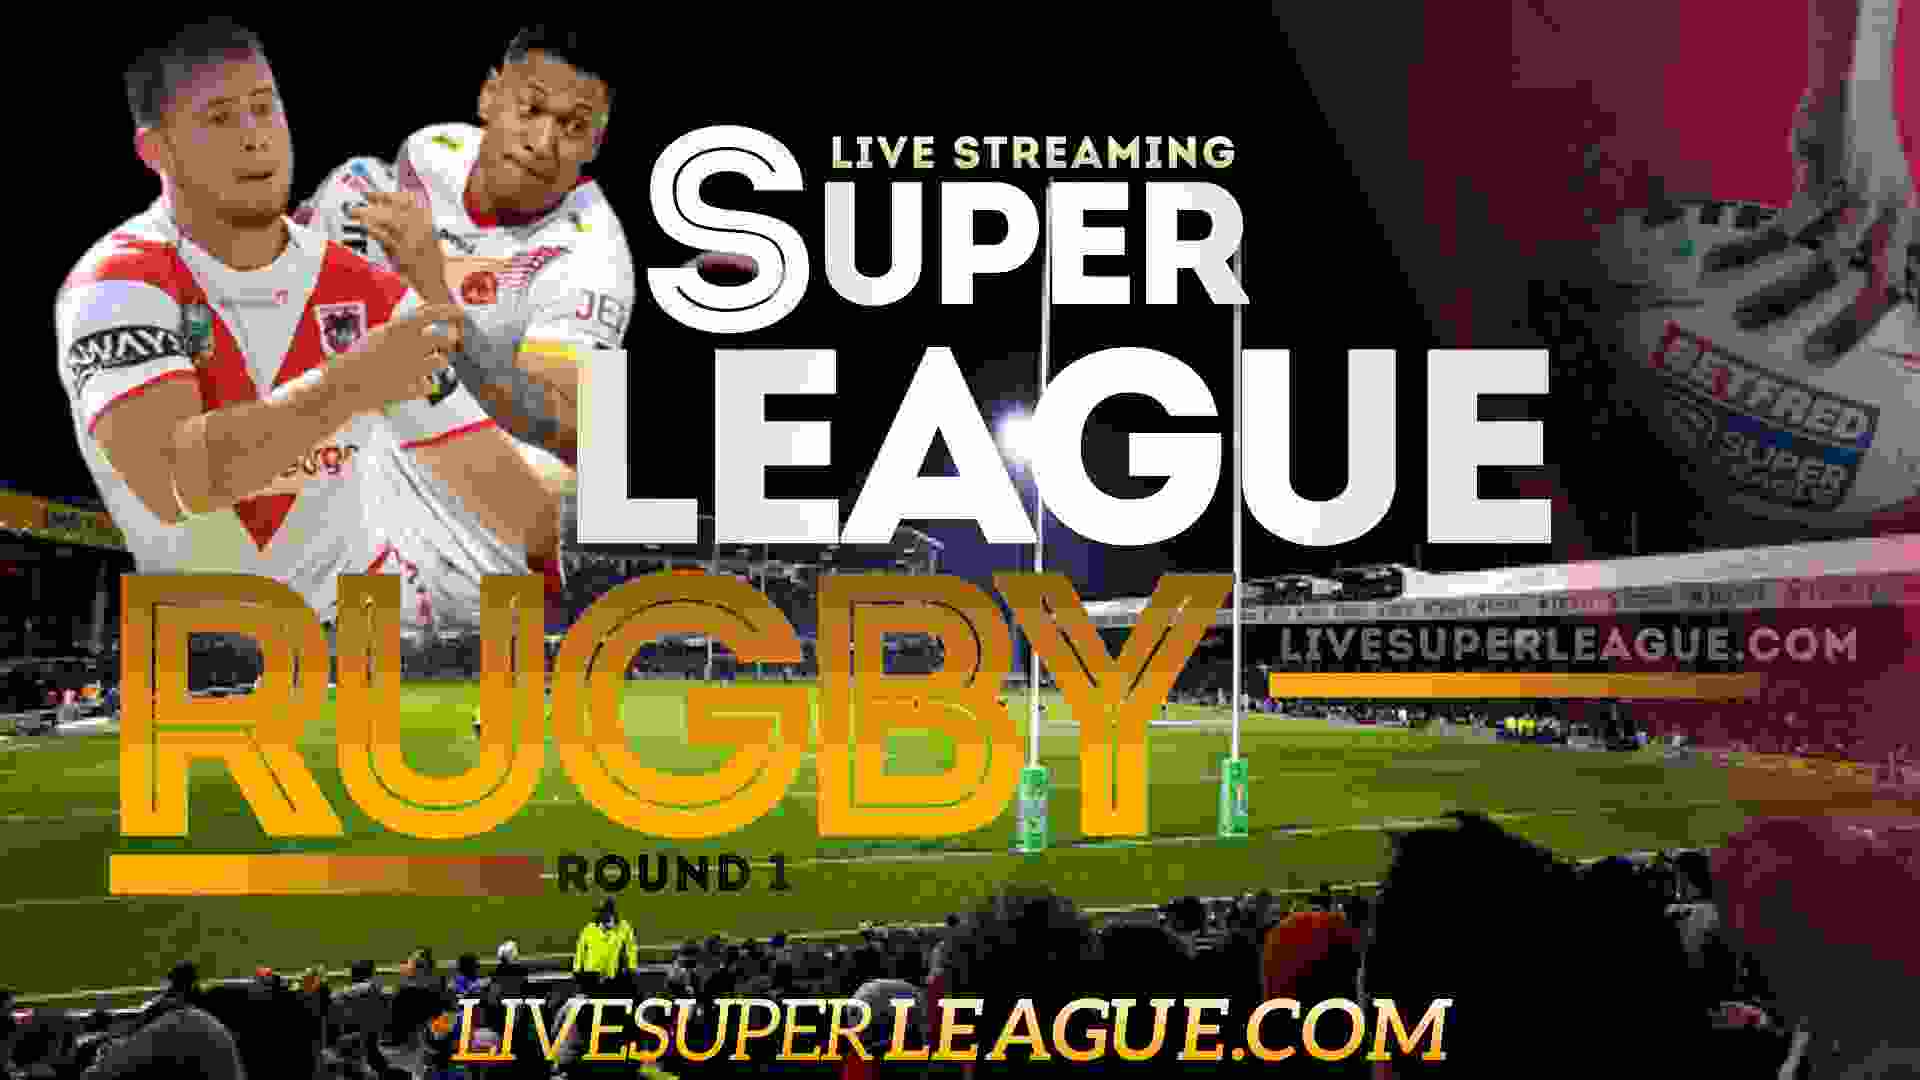 dragons-vs-rovers-rugby-live-stream